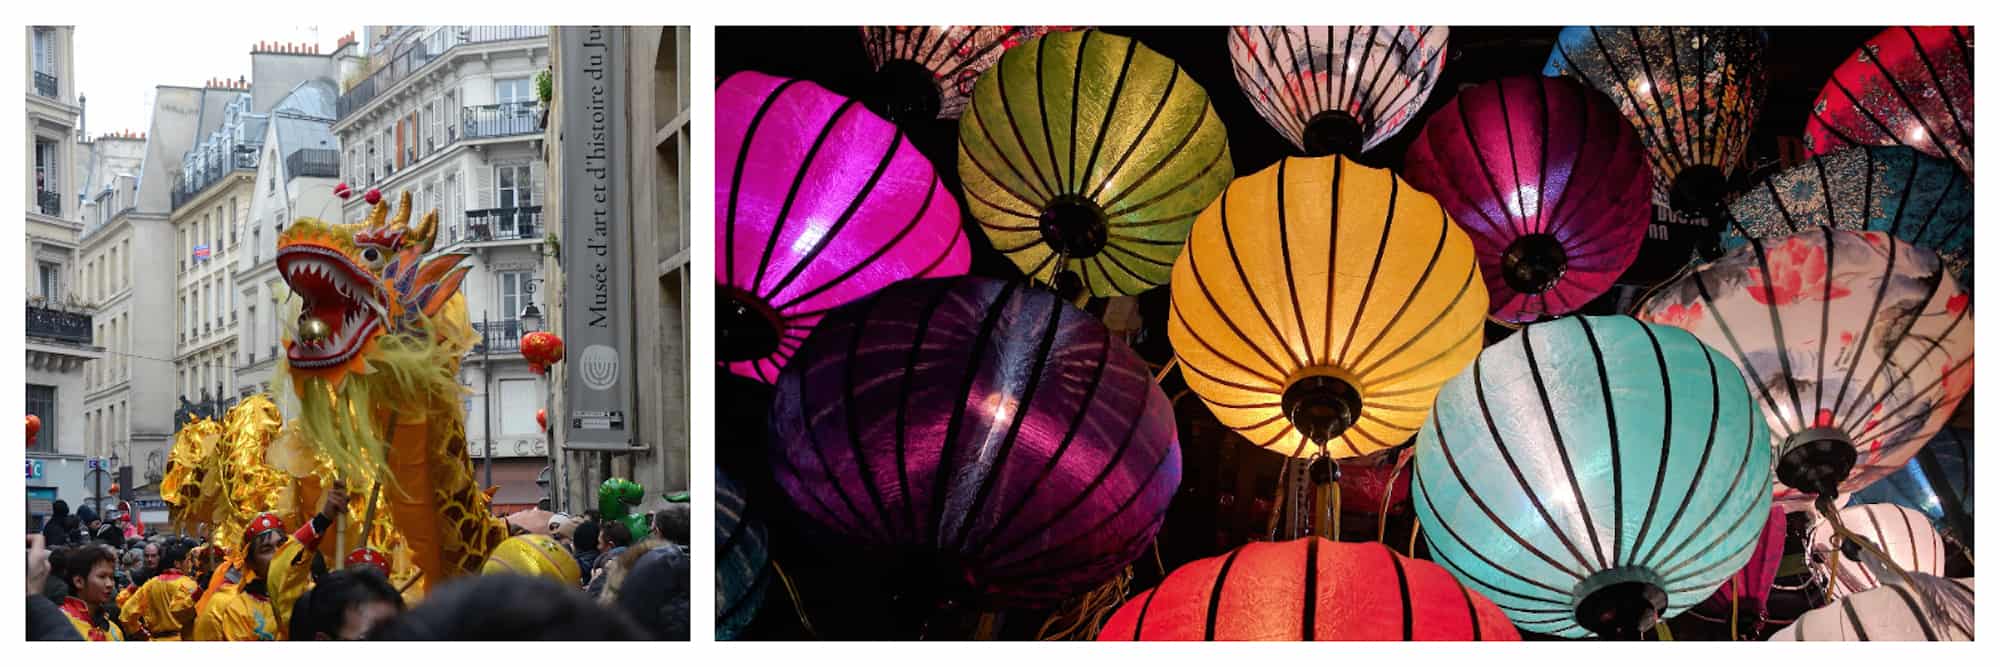 HiP Paris Blog rounds up the top events in Paris this February like where to celebrate Chinese New Year in Paris, and see the colorful dragons dance (left) and lanterns in the streets (right).